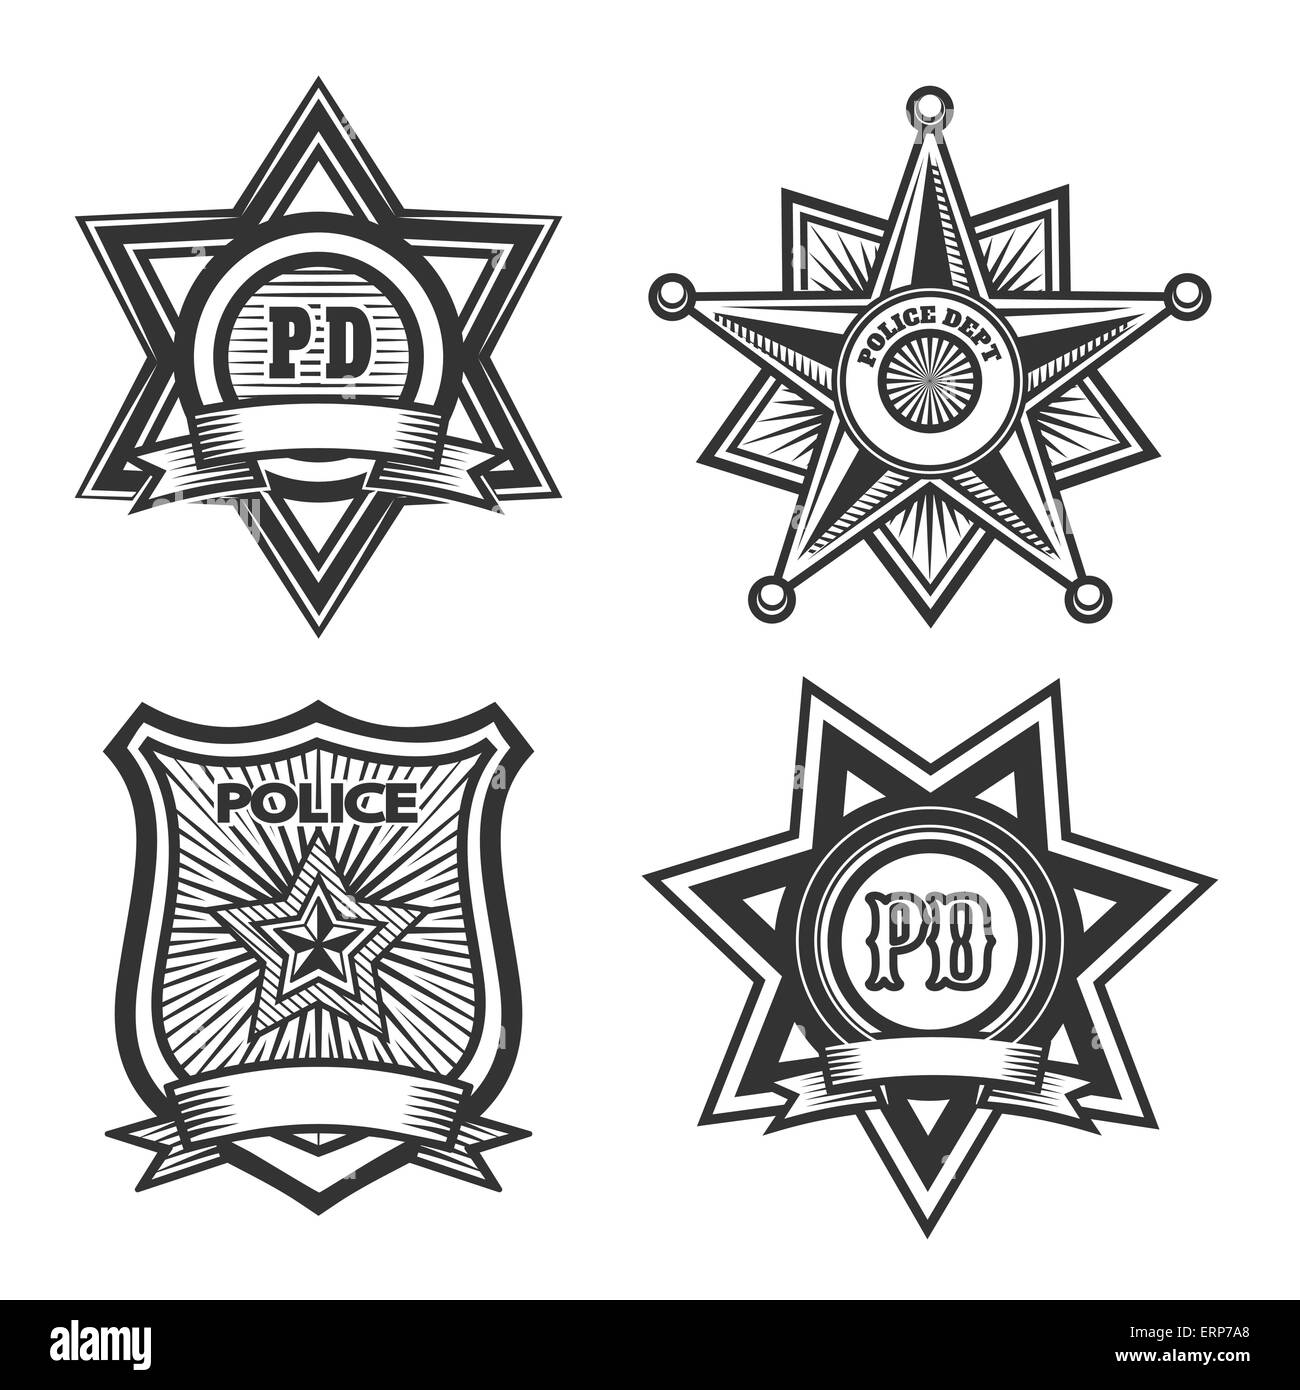 Police badges set. Monochrome isolated on white background. Only free font used. Stock Vector